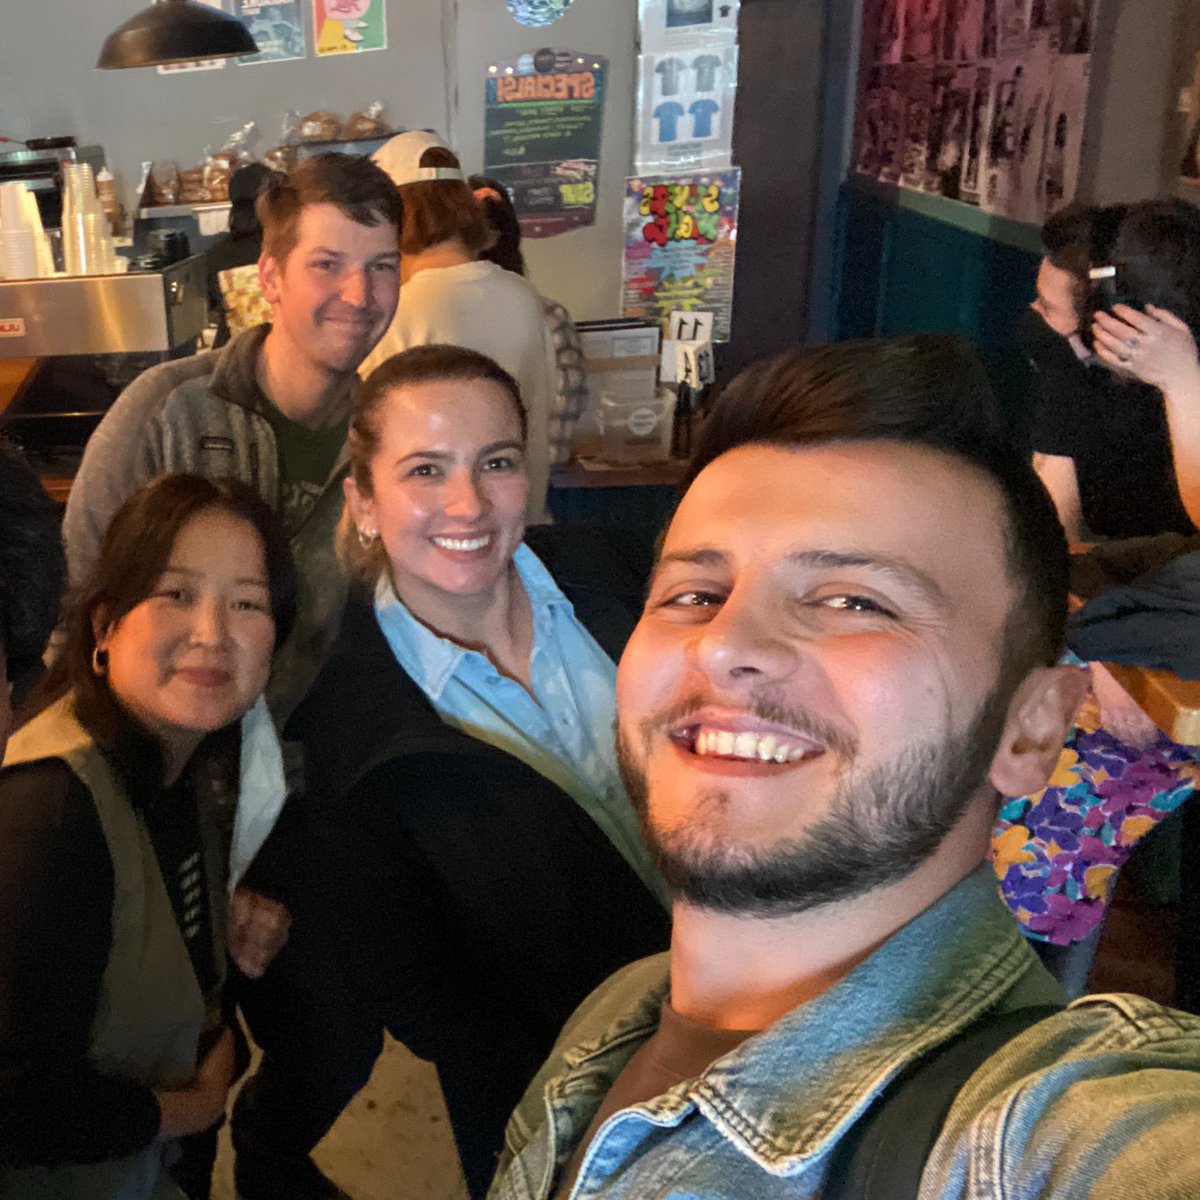 Last Friday, some of our students went to Post Pike Cafe to celebrate Final Friday! Here is a photo that one of our students took!

#alpslanguageschool #alpsactivities #studyinseattle #postpikecafe #coffee #cafe #Seattle #Washington #studyenglishabroad #travel #study #studyabroad